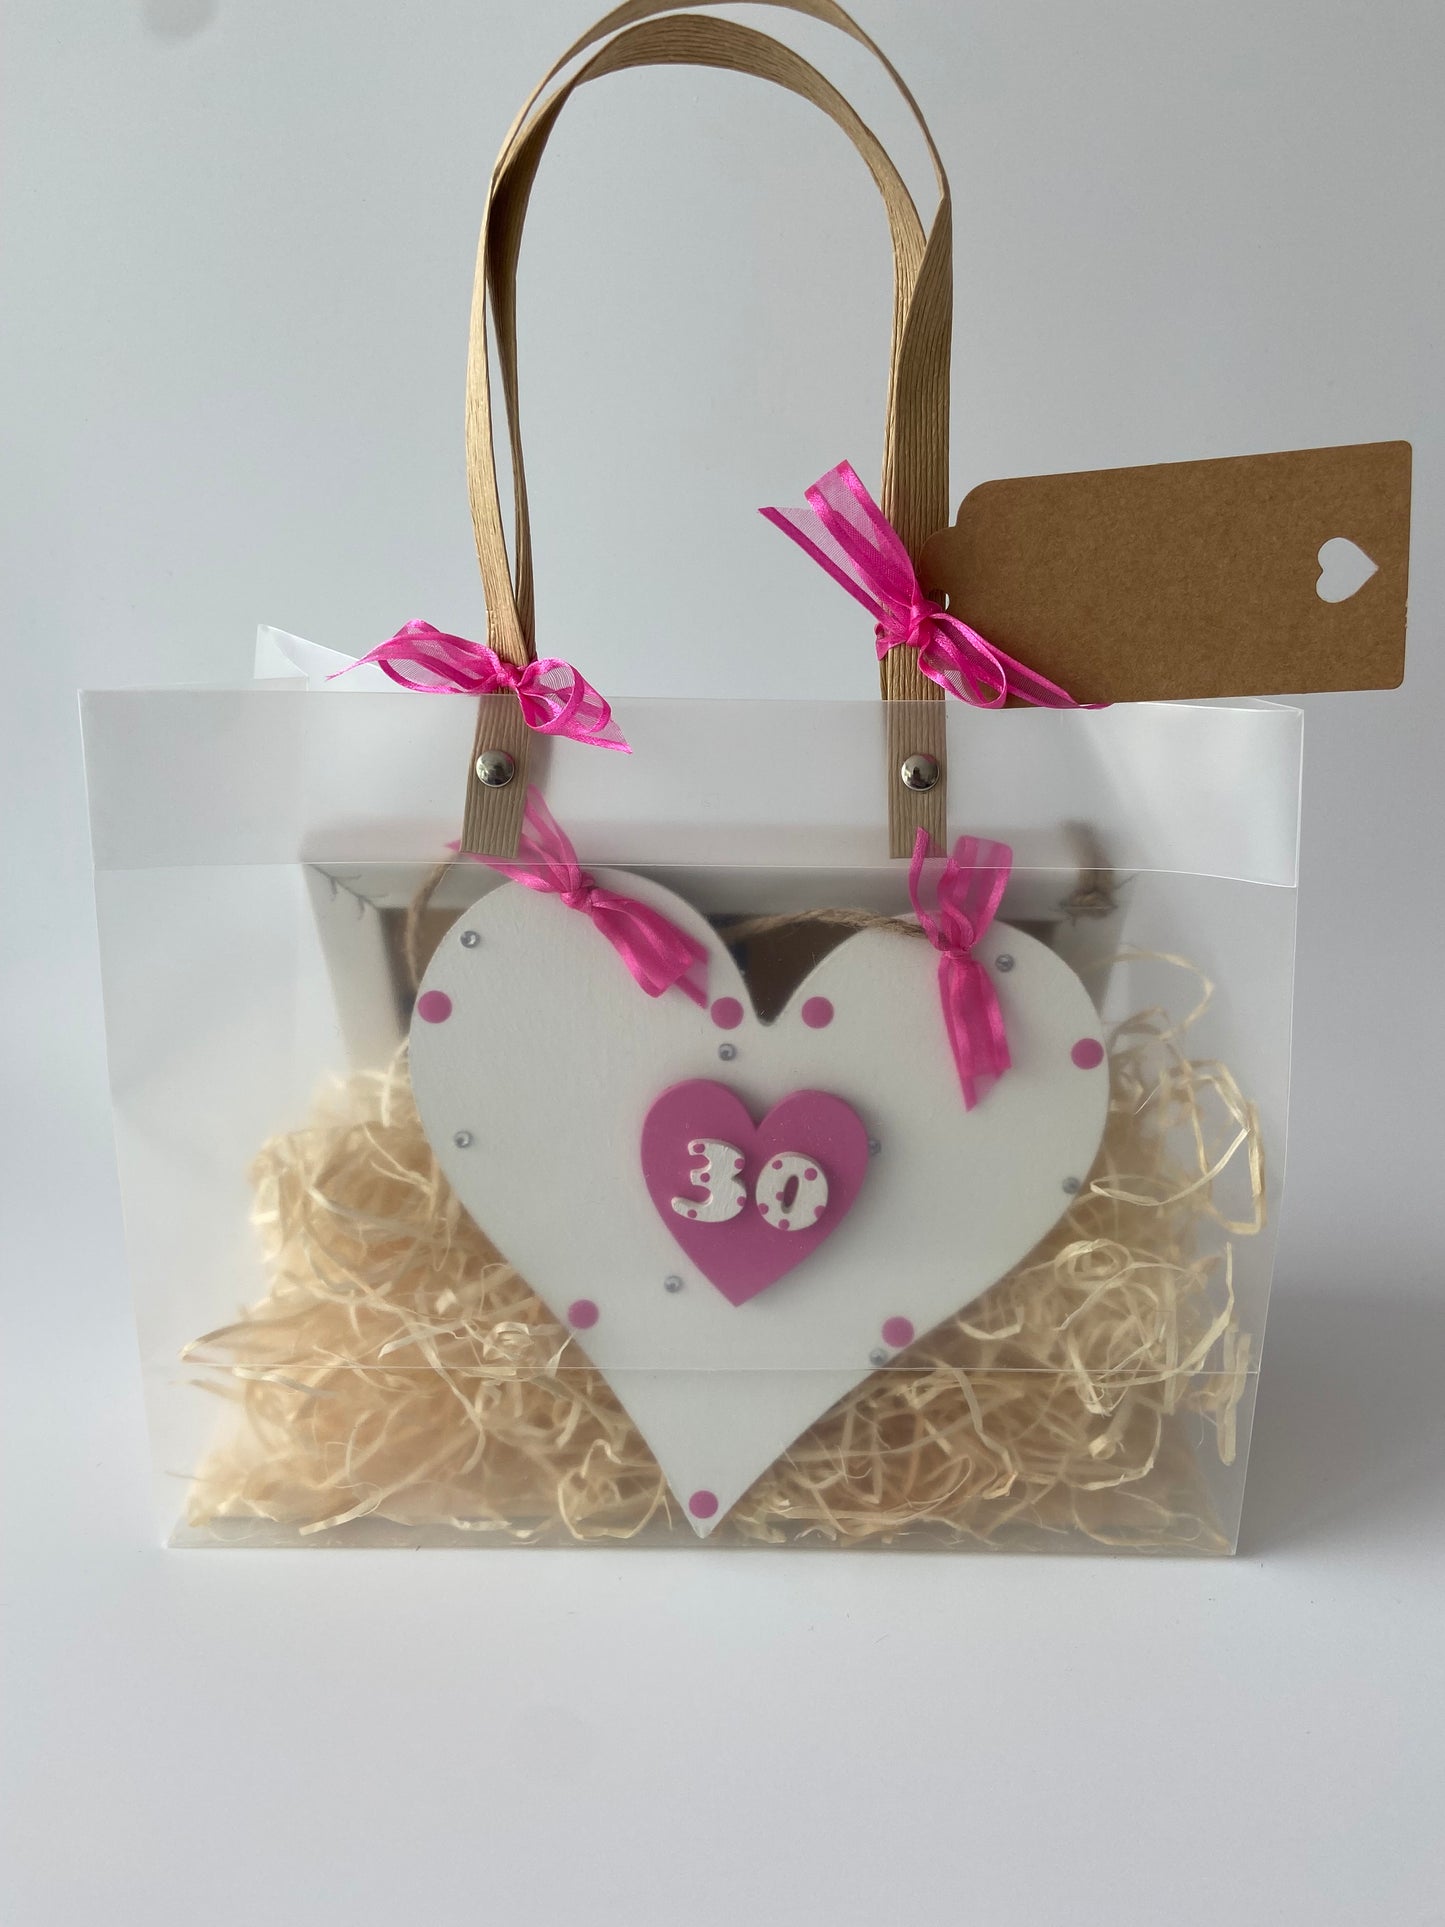 Image showing pink 30th birthday plaque with pink ribbon and polka dots